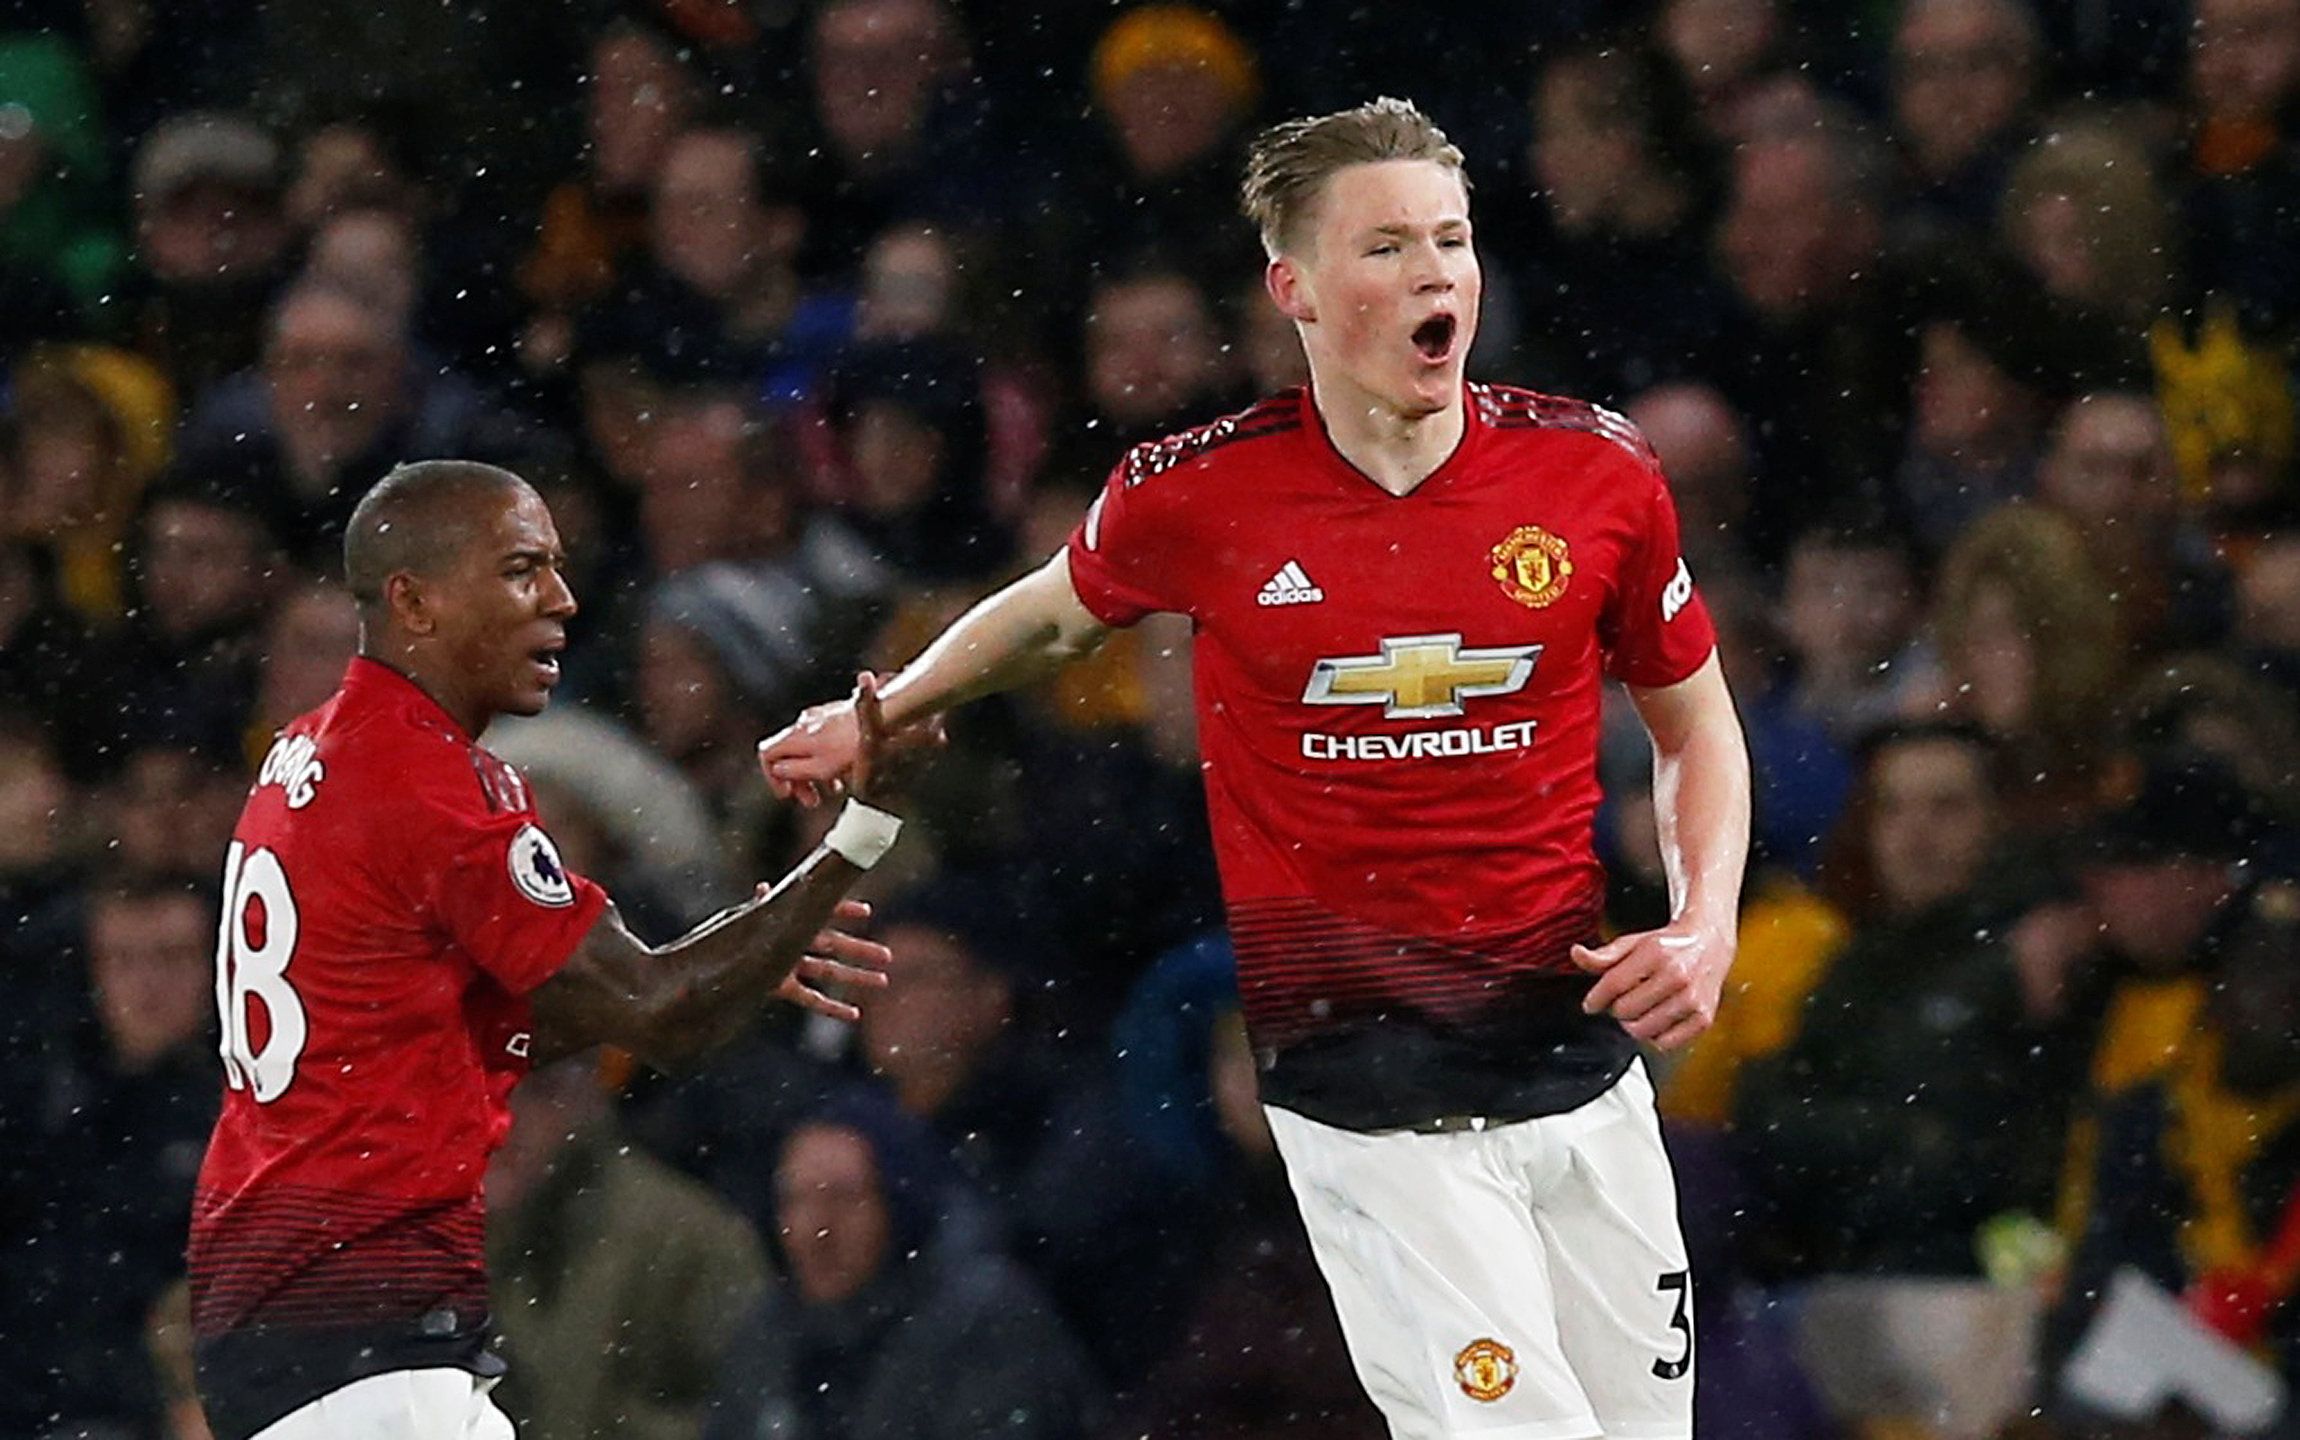 Soccer Football - Premier League - Wolverhampton Wanderers v Manchester United - Molineux Stadium, Wolverhampton, Britain - April 2, 2019  Manchester United's Scott McTominay celebrates scoring their first goal      REUTERS/Andrew Yates  EDITORIAL USE ONLY. No use with unauthorized audio, video, data, fixture lists, club/league logos or 